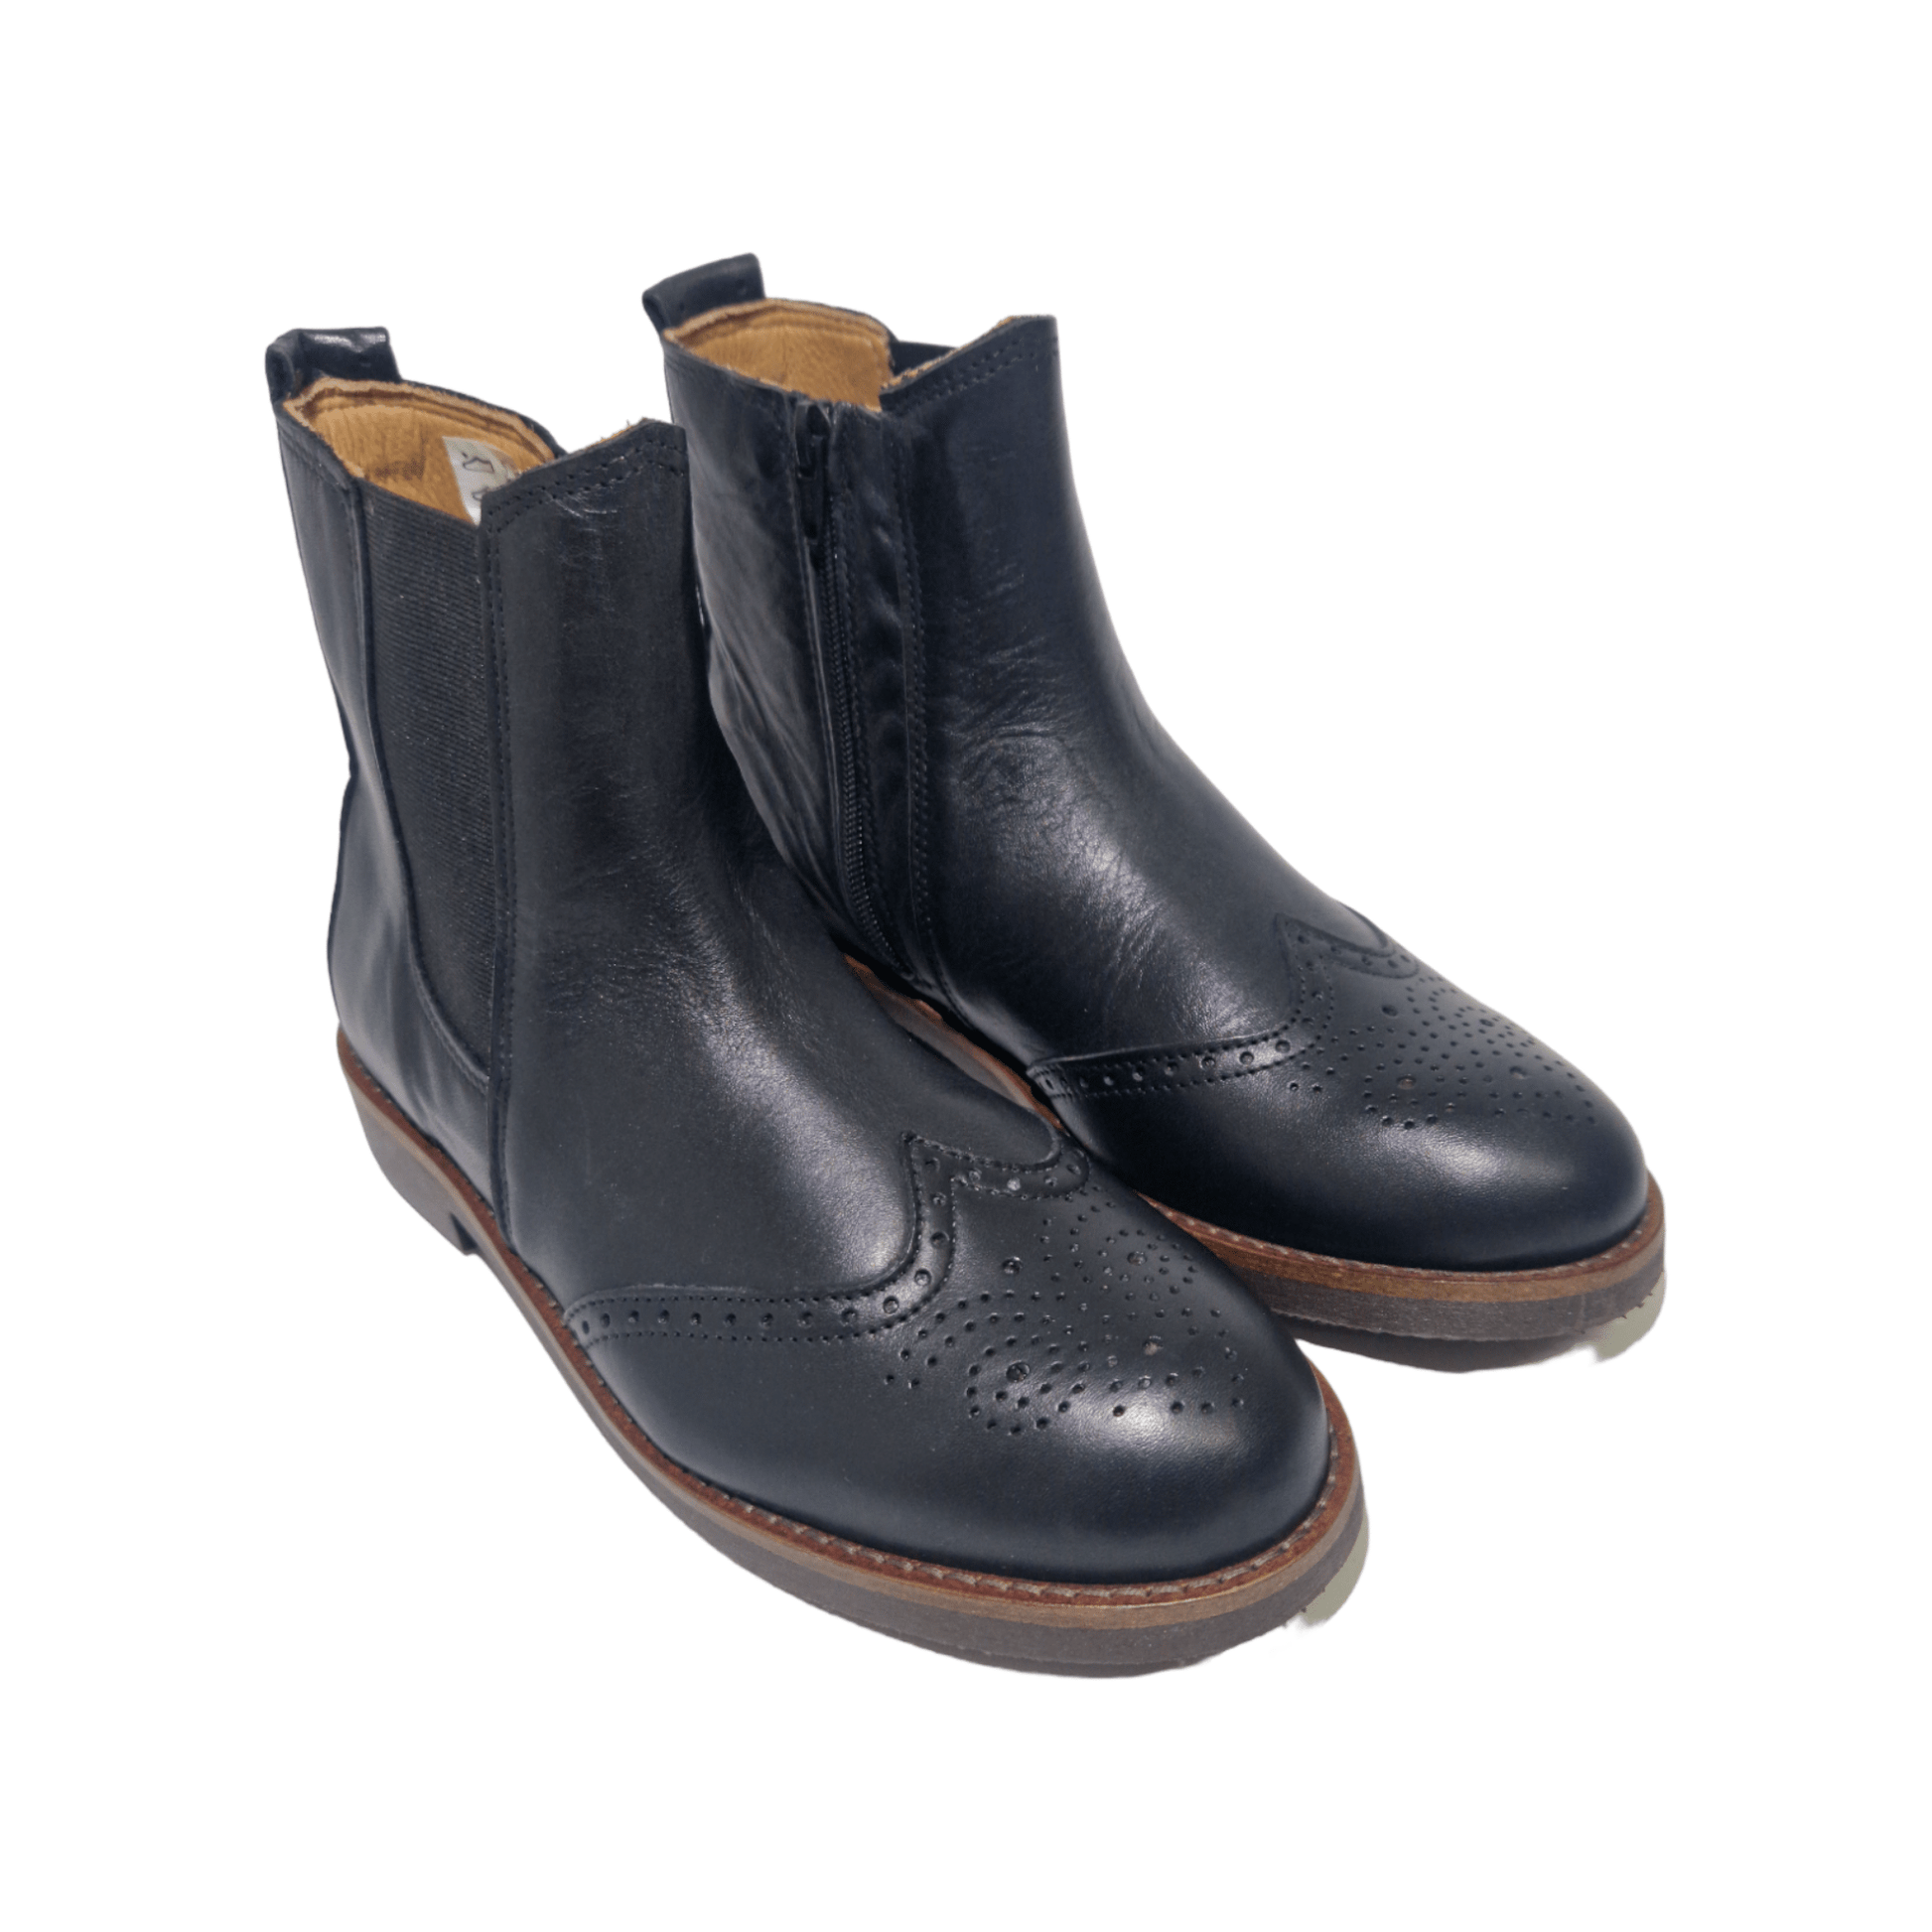 Chelsea Women Boots - OldMulla - Boots Store, Handmade By George Family